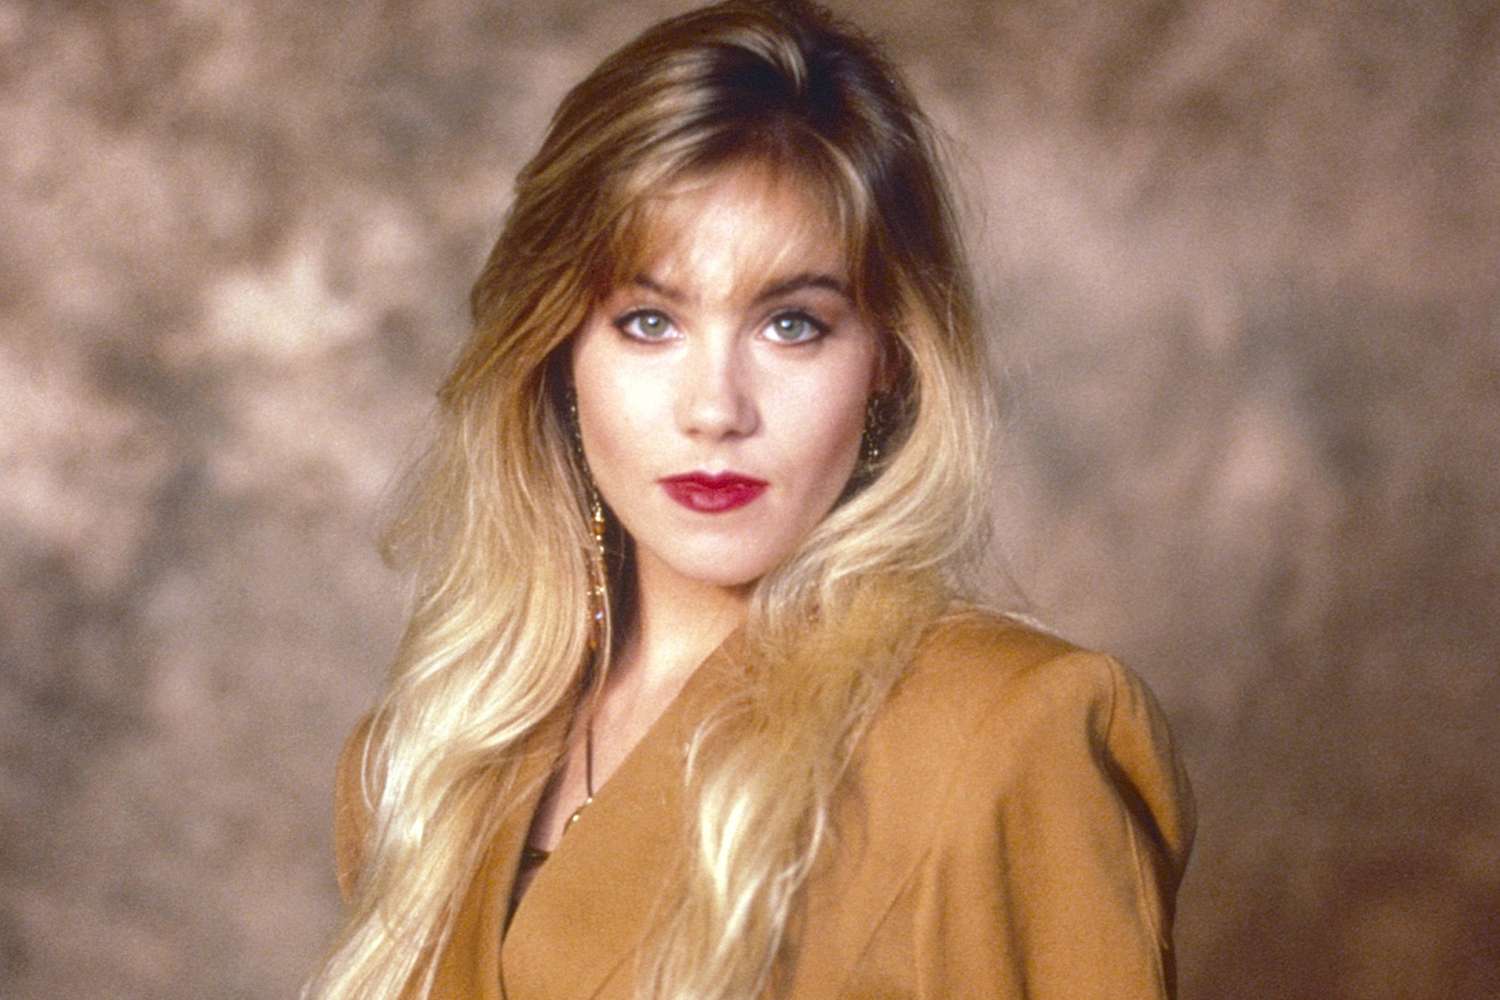 Christina Applegate 'didn't eat' in struggle with anorexia on 'Married With Children'